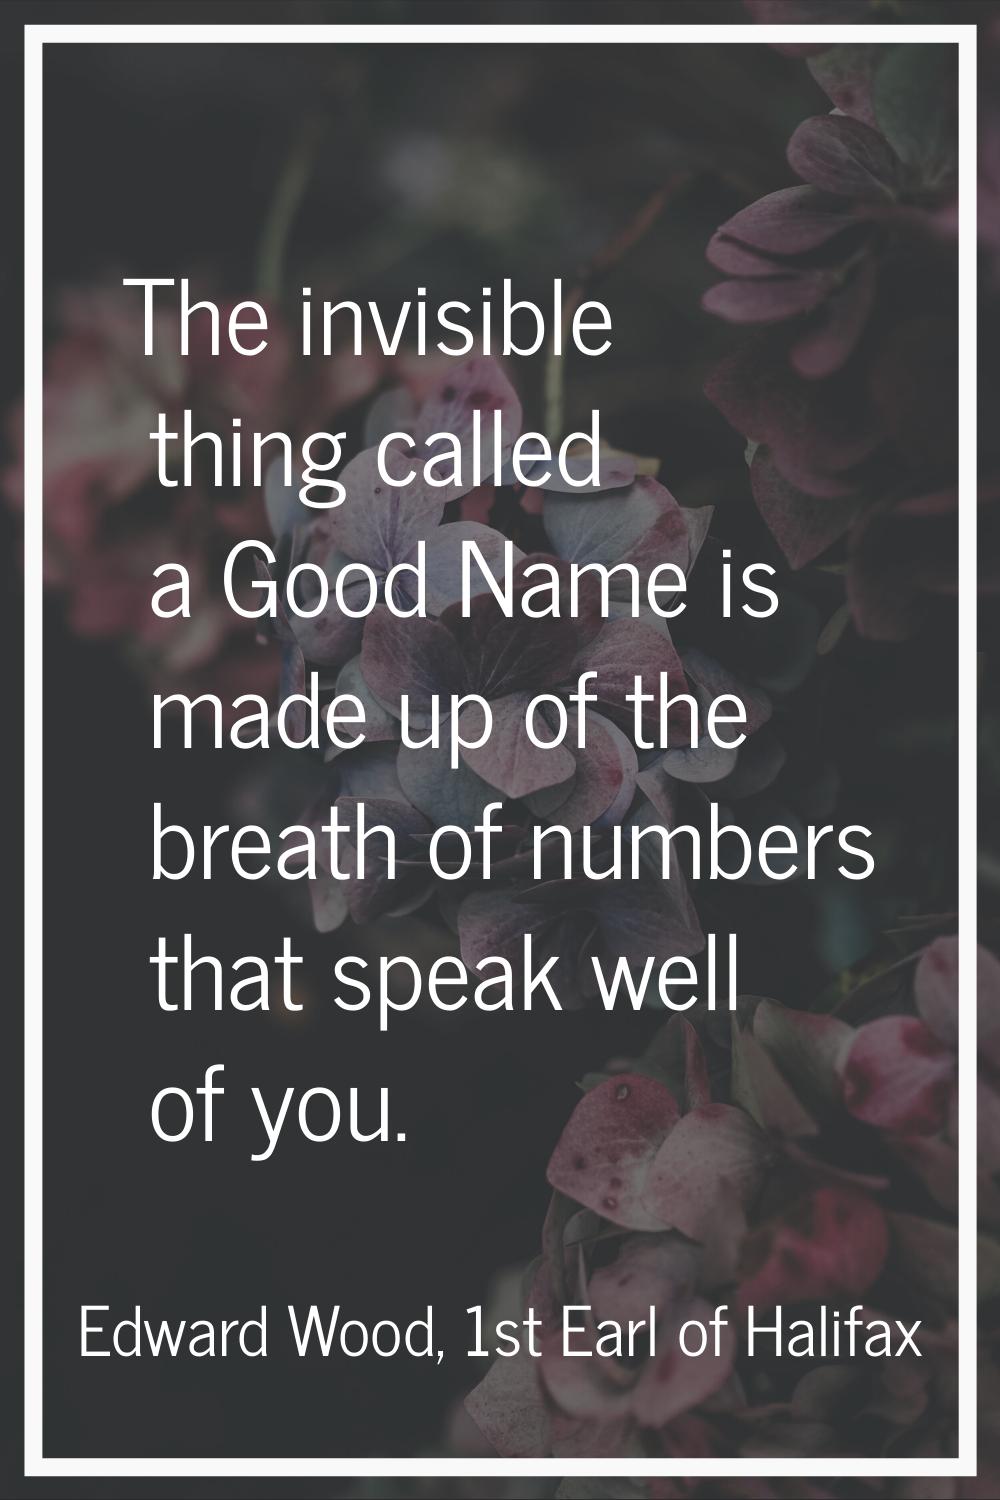 The invisible thing called a Good Name is made up of the breath of numbers that speak well of you.